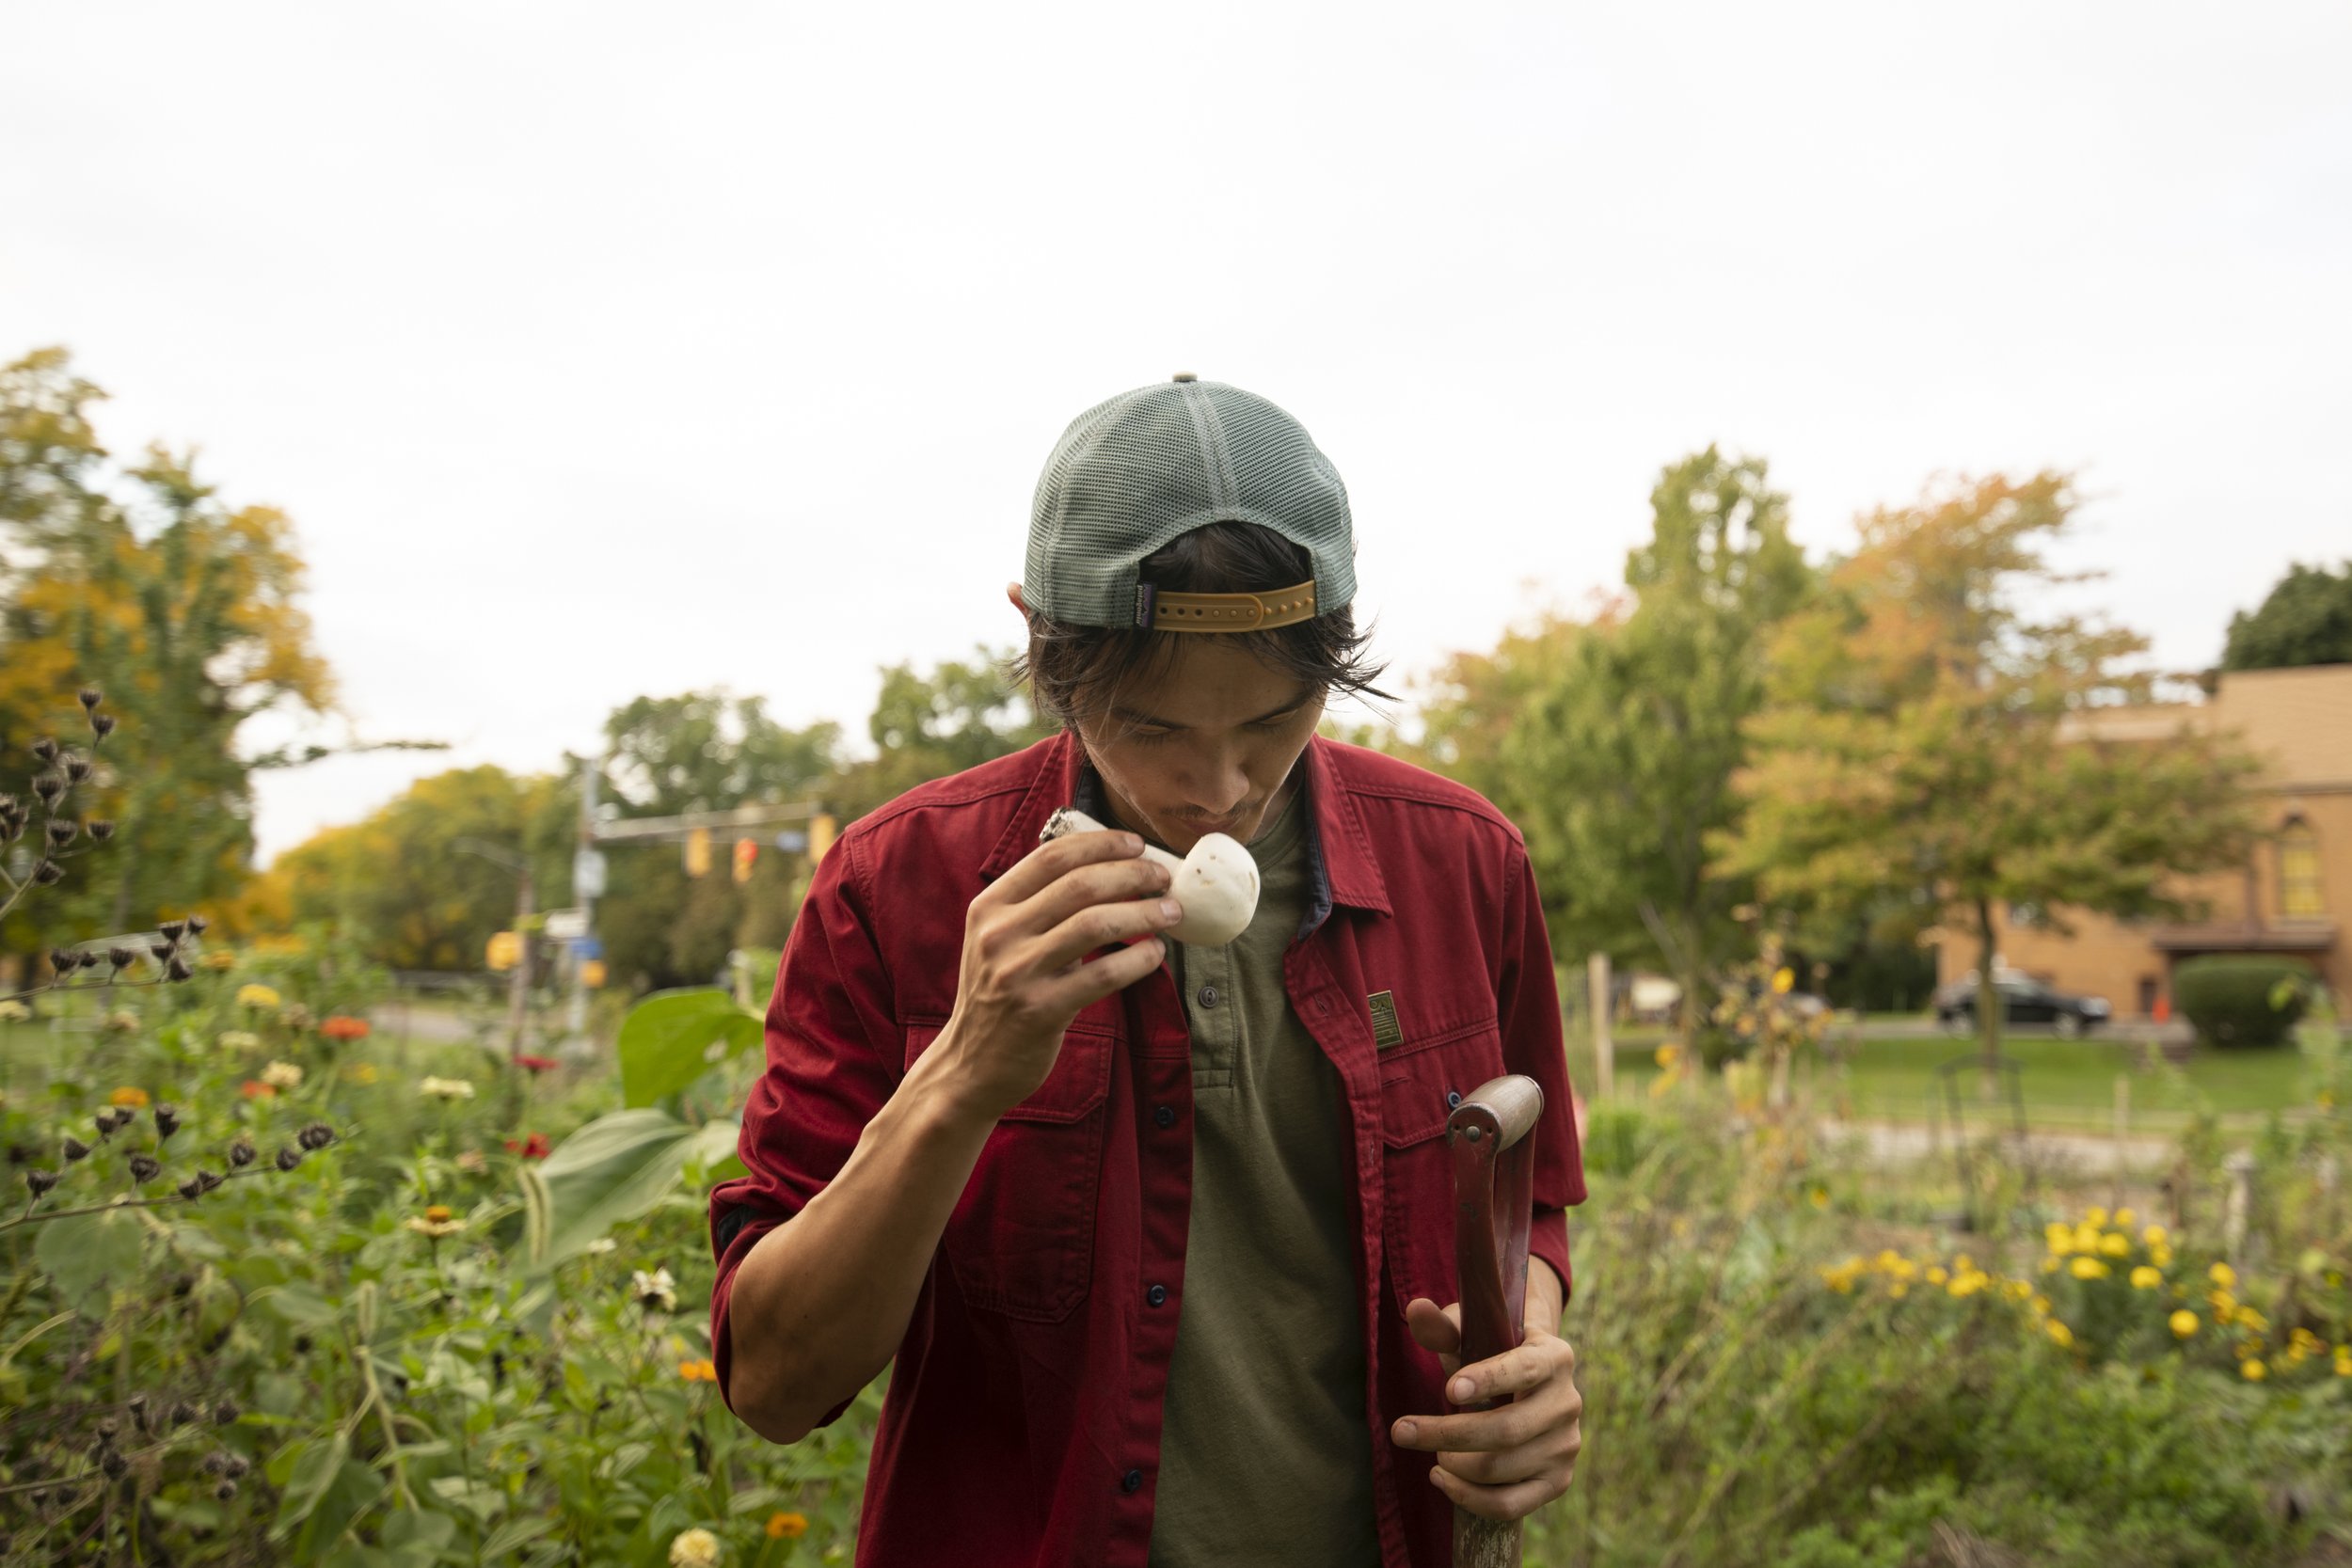  Shane Linden, a volunteer at the farm, picks a mushroom at 490 Farmers Community Garden in Rochester, N.Y. on September 29, 2021. Linden moved into an apartment a couple of blocks away and was looking for a garden to volunteer in when he noticed 490